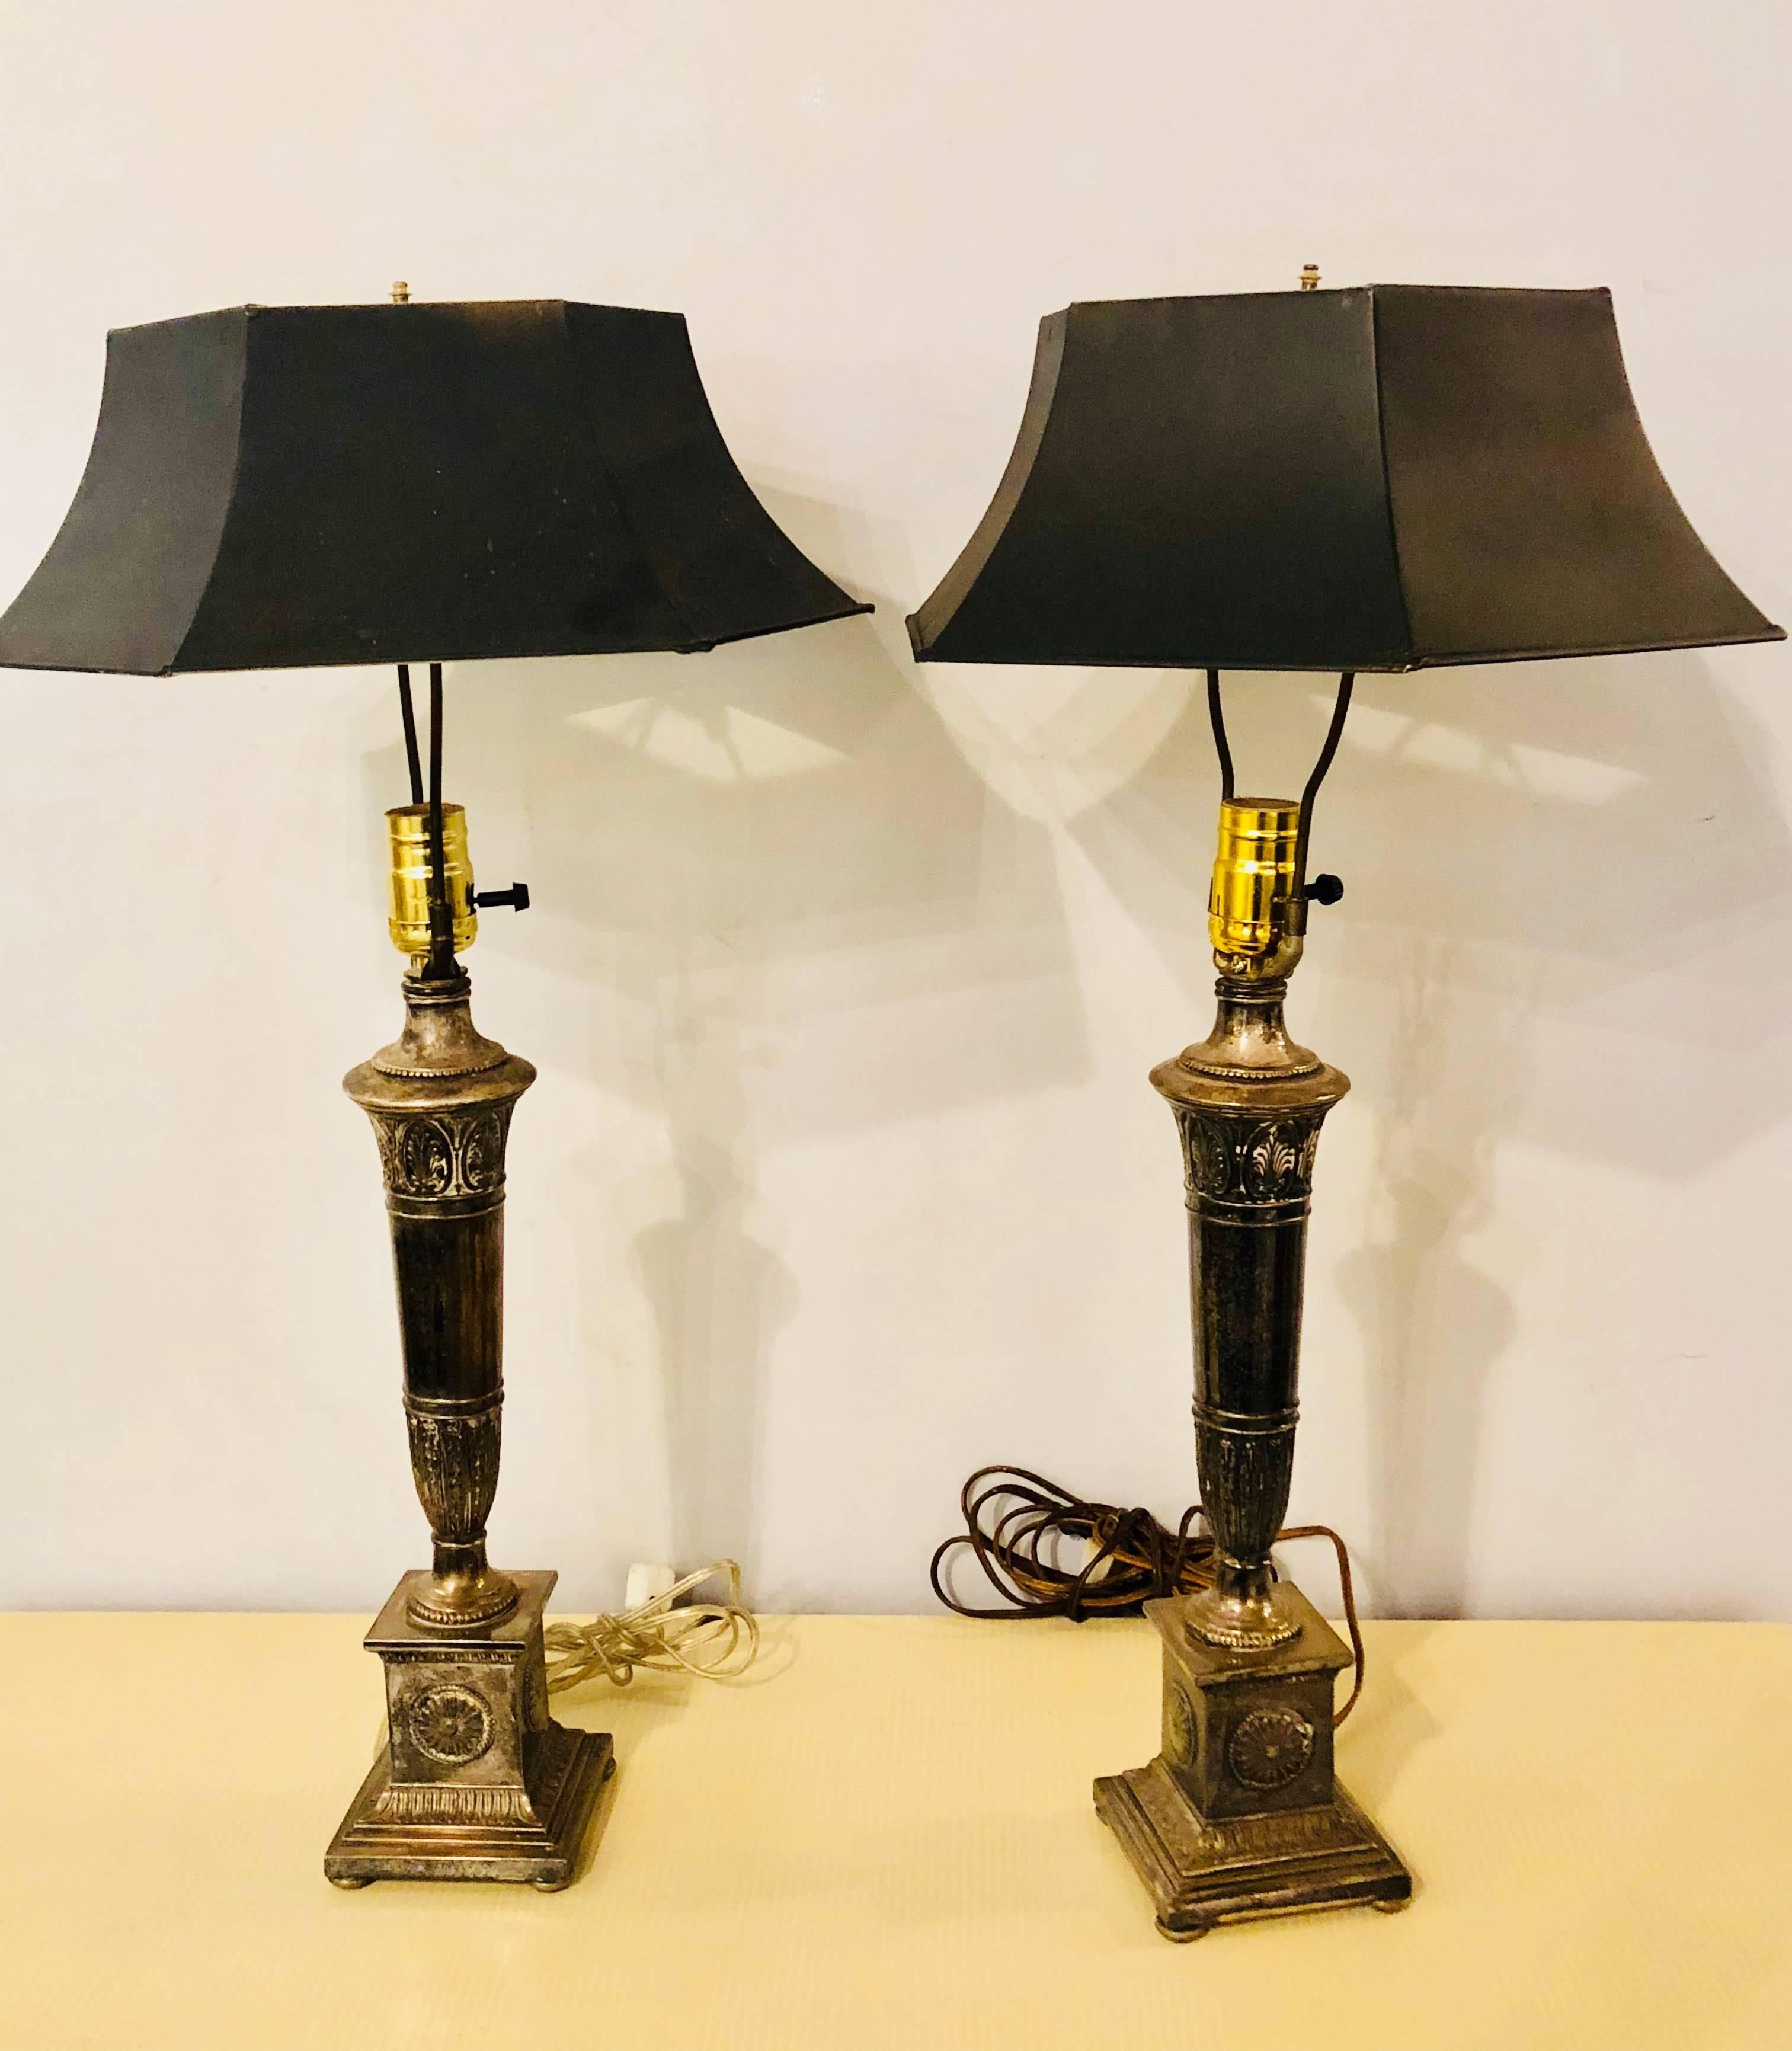 Pair of Neoclassic Style Silvered Metal Table Lamps with Ebony Metal Shades 1